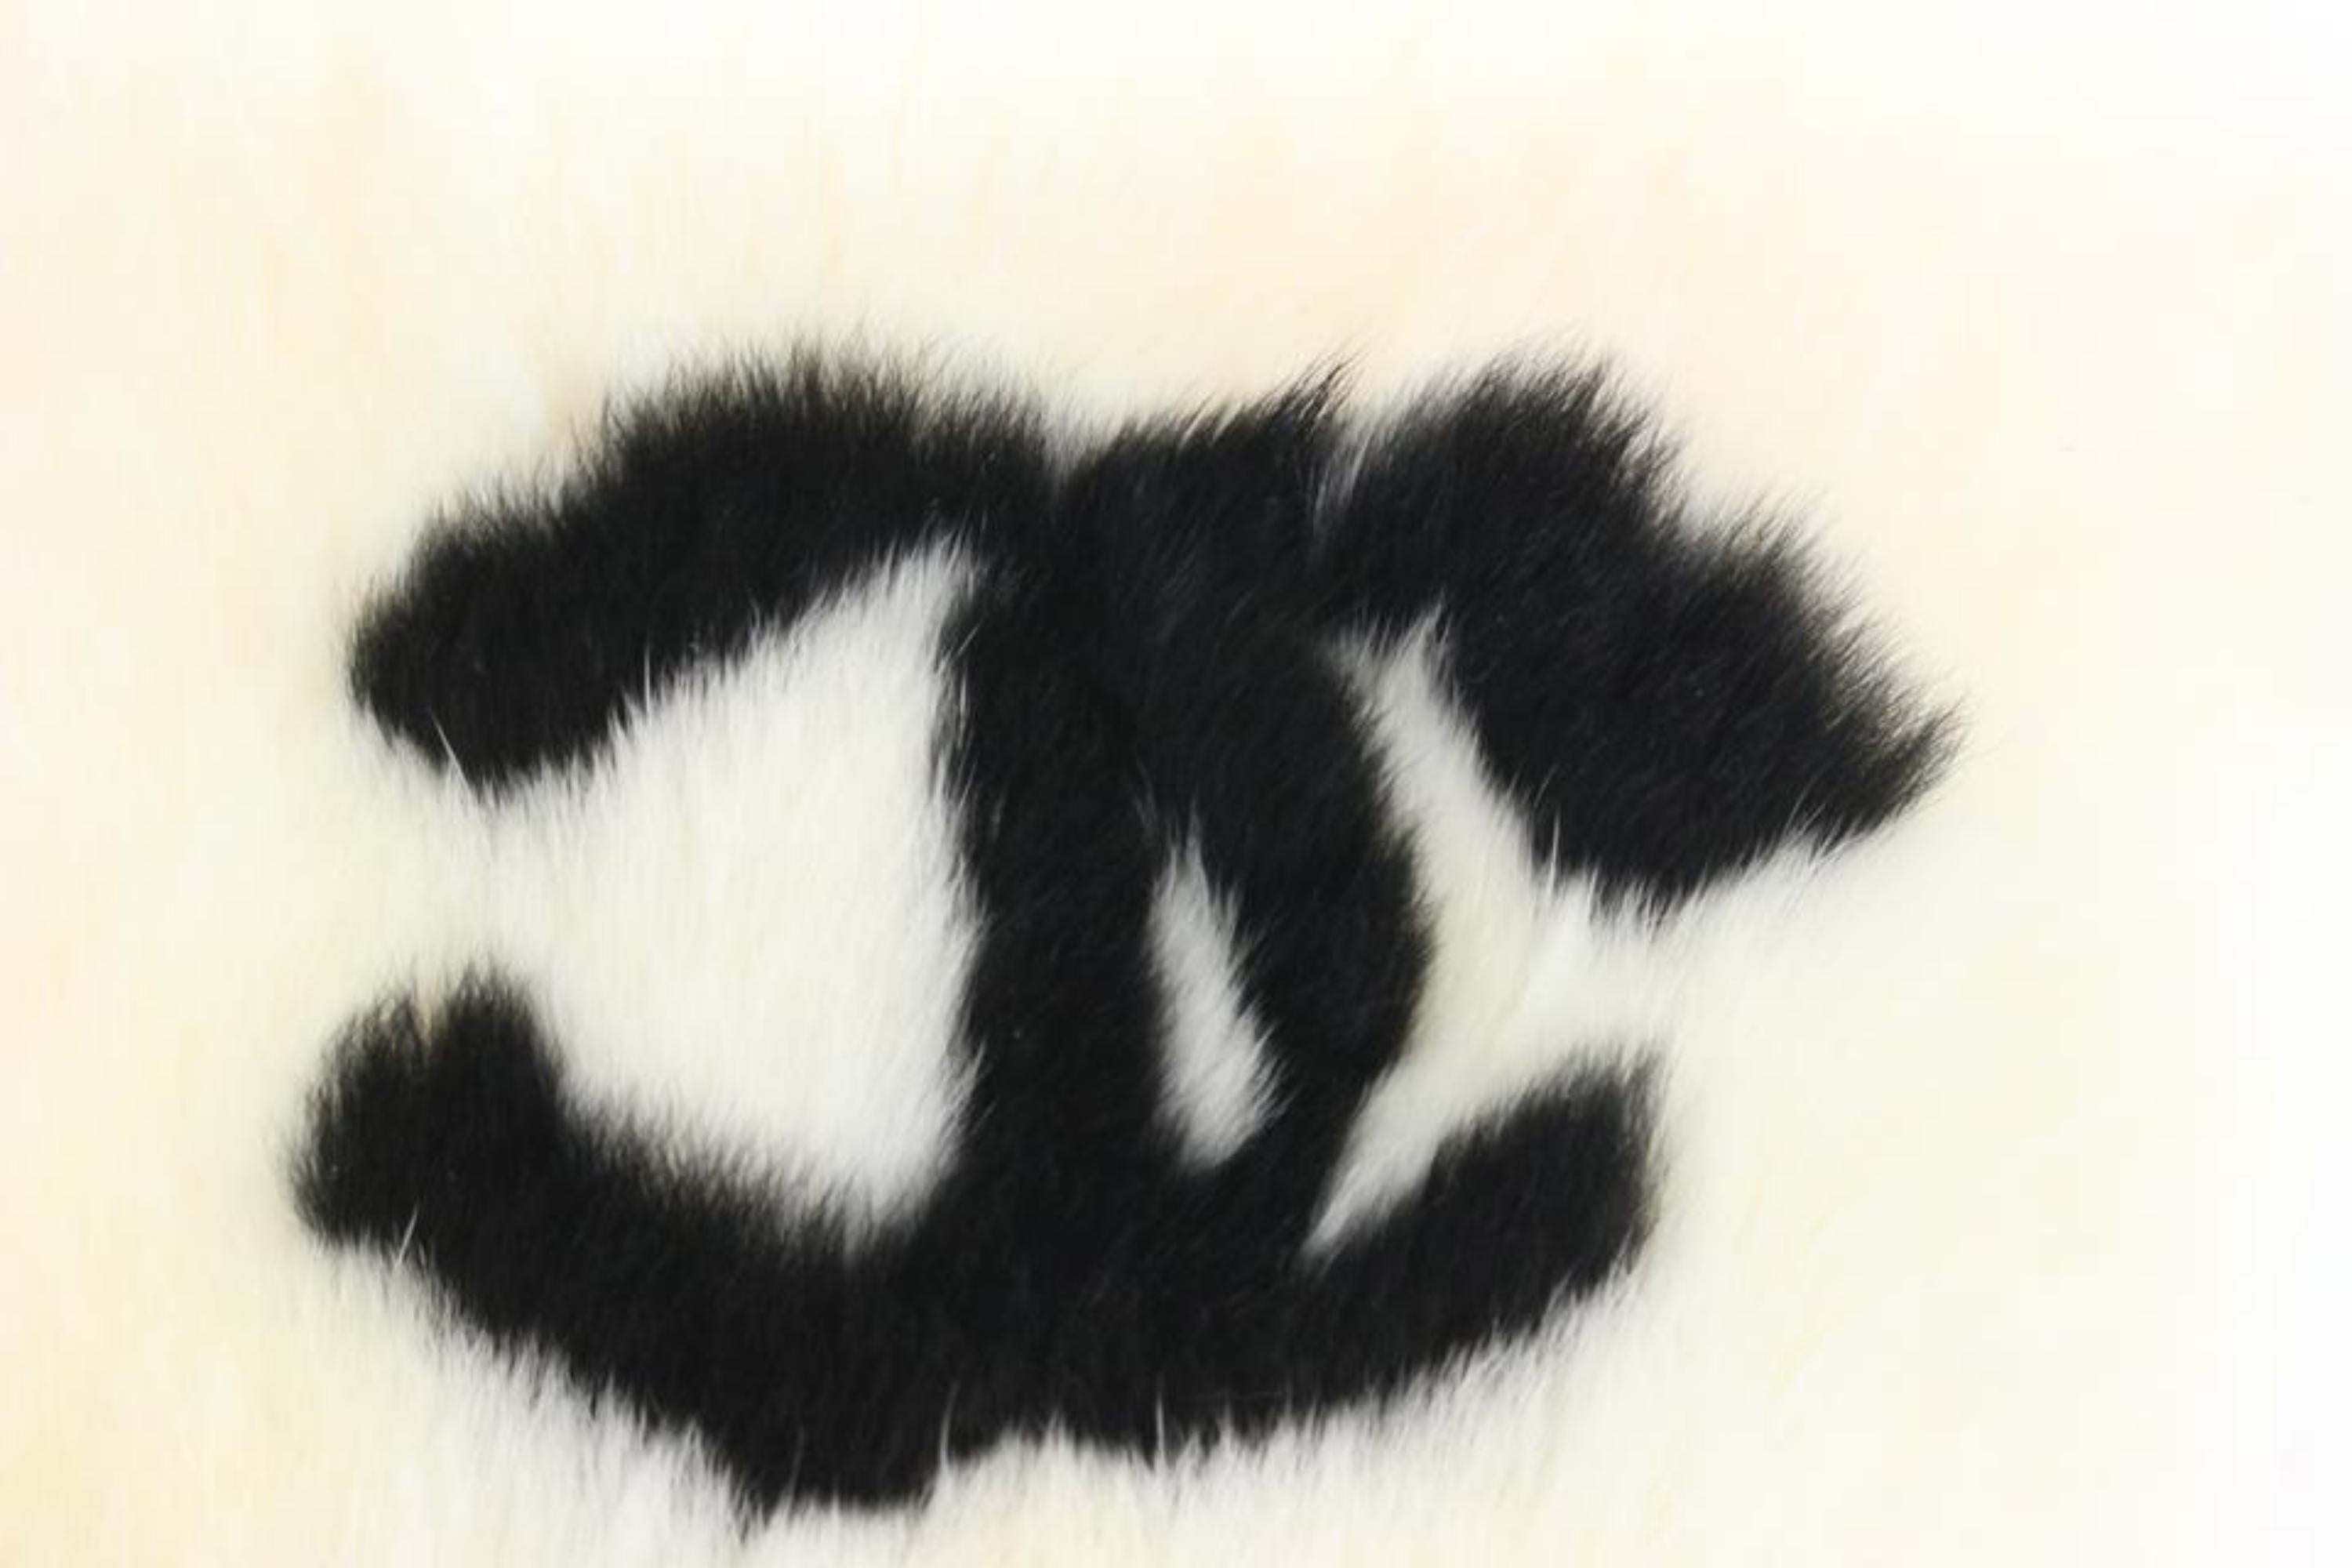 Chanel White x Black CC Rabbit Fur Wrist Band Bracelet s331ck41 In Excellent Condition For Sale In Dix hills, NY